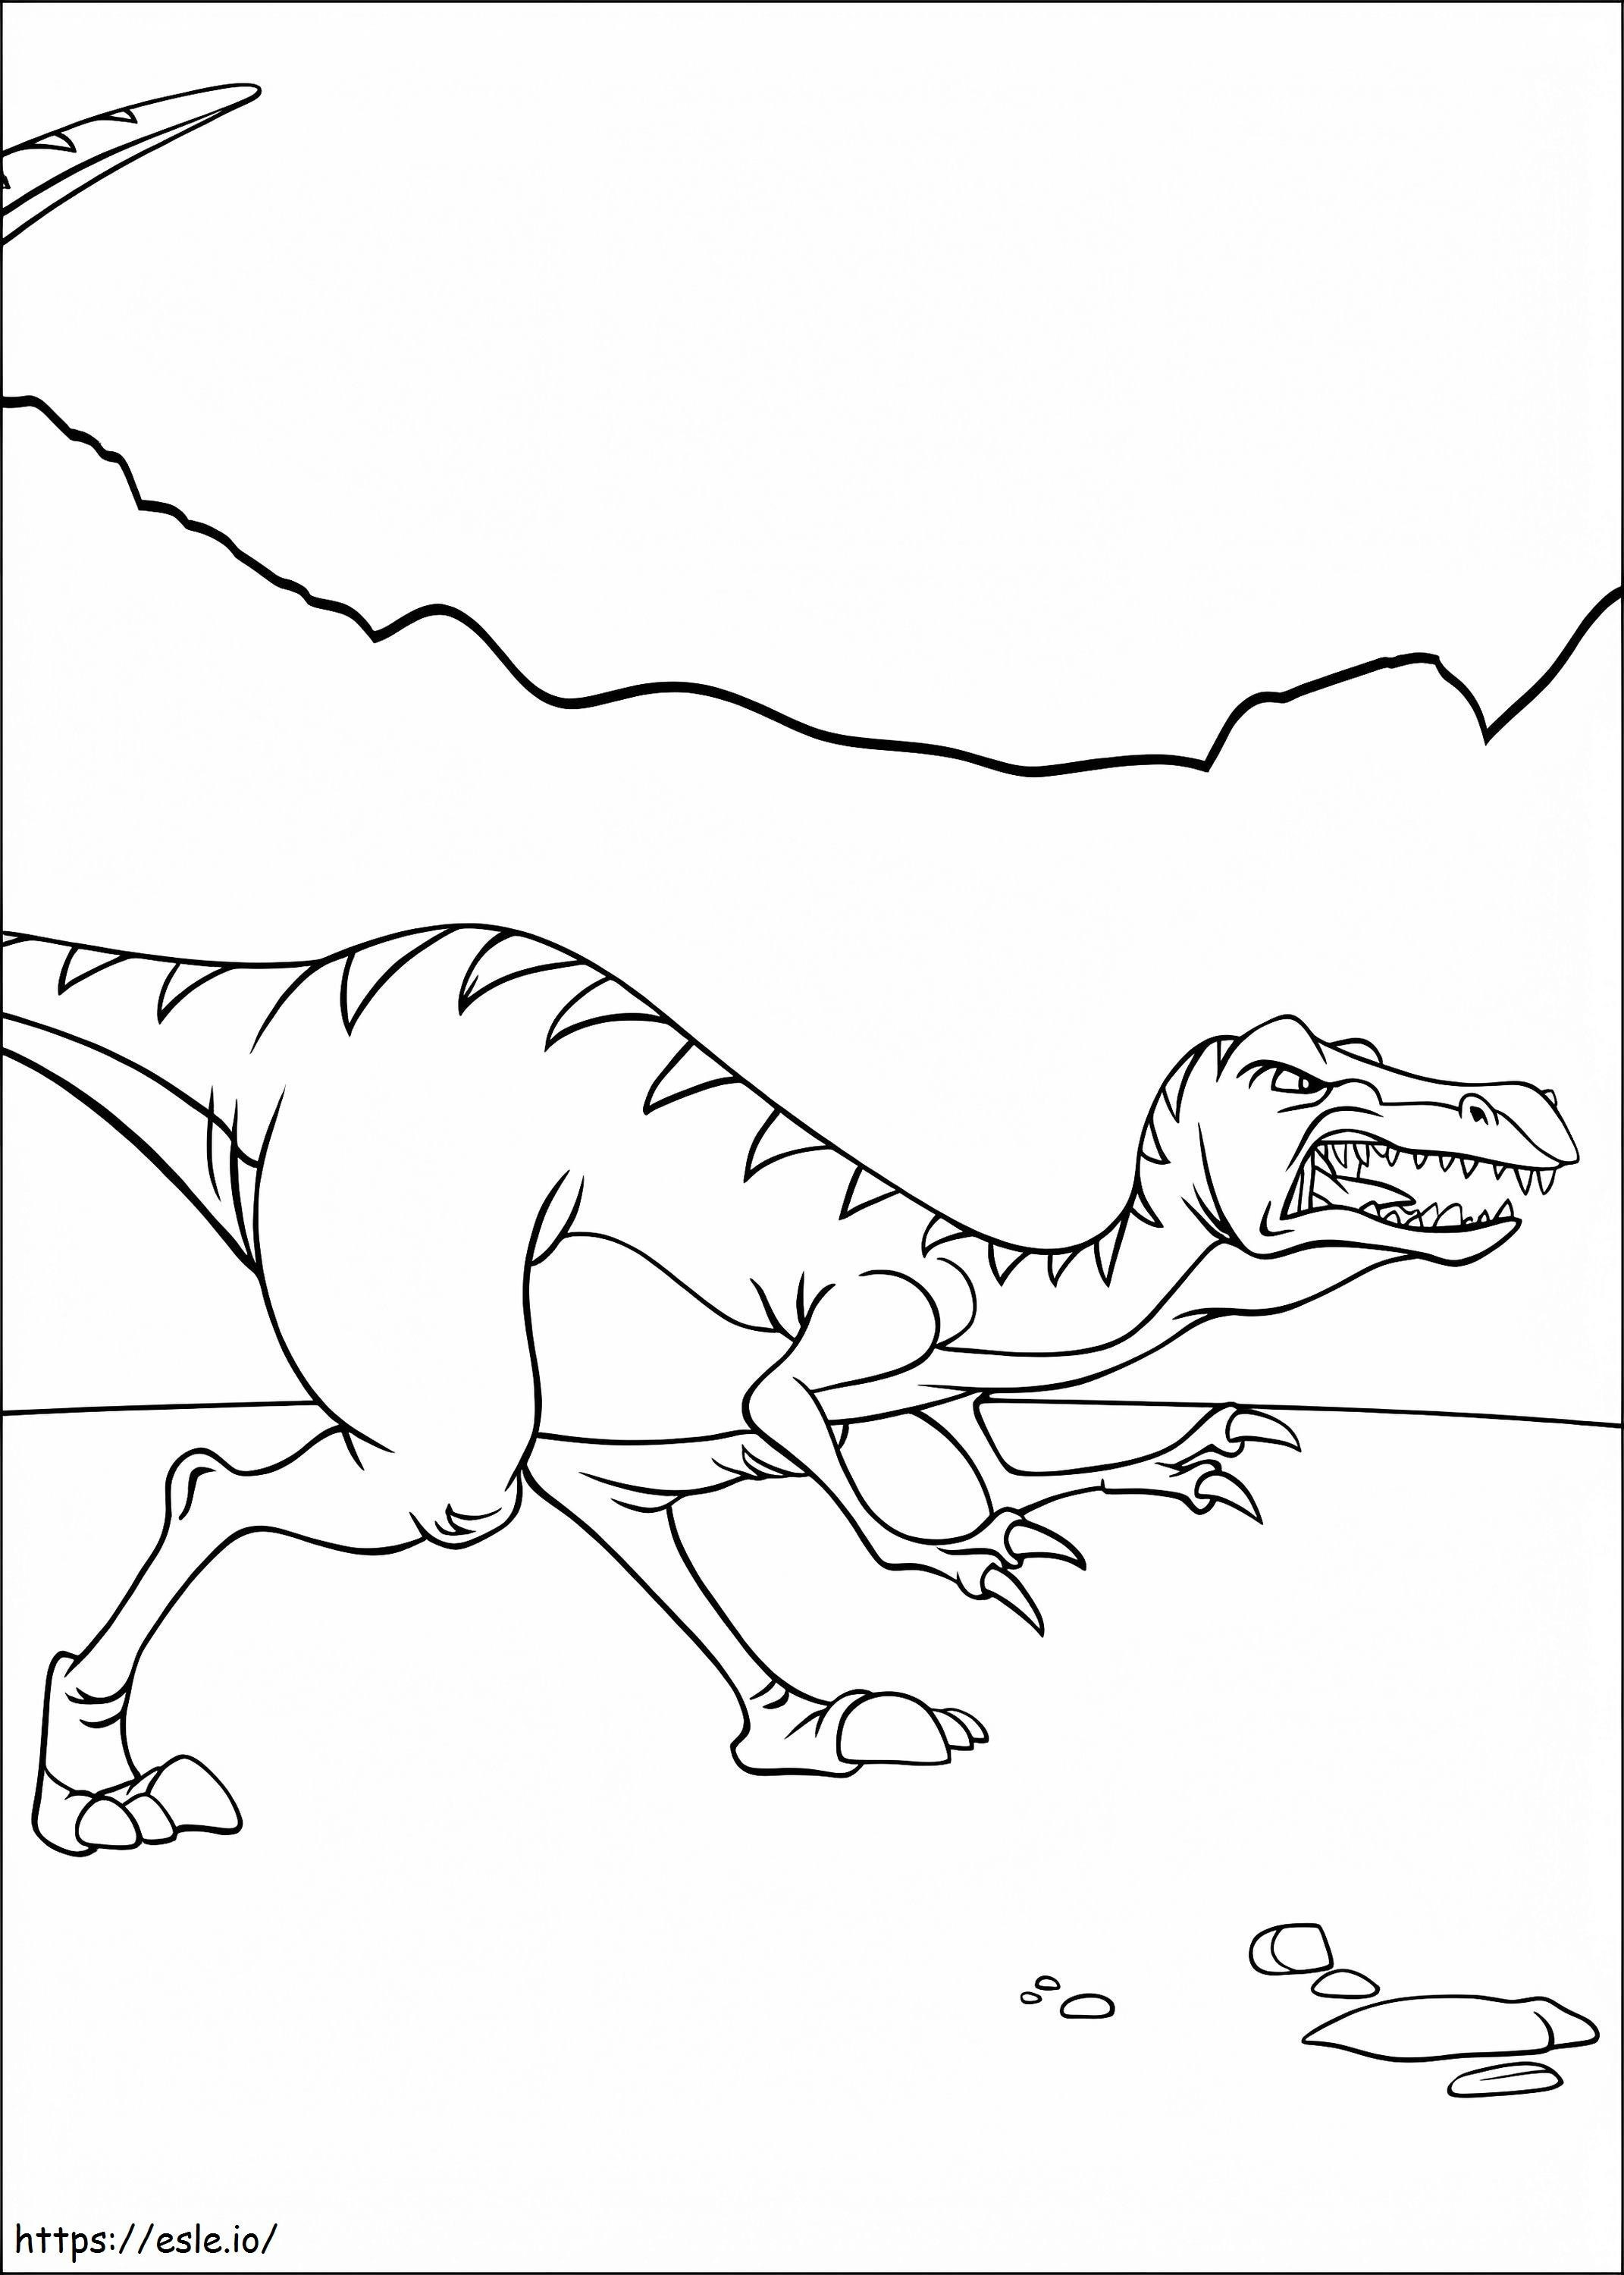 Print Land Before Time coloring page